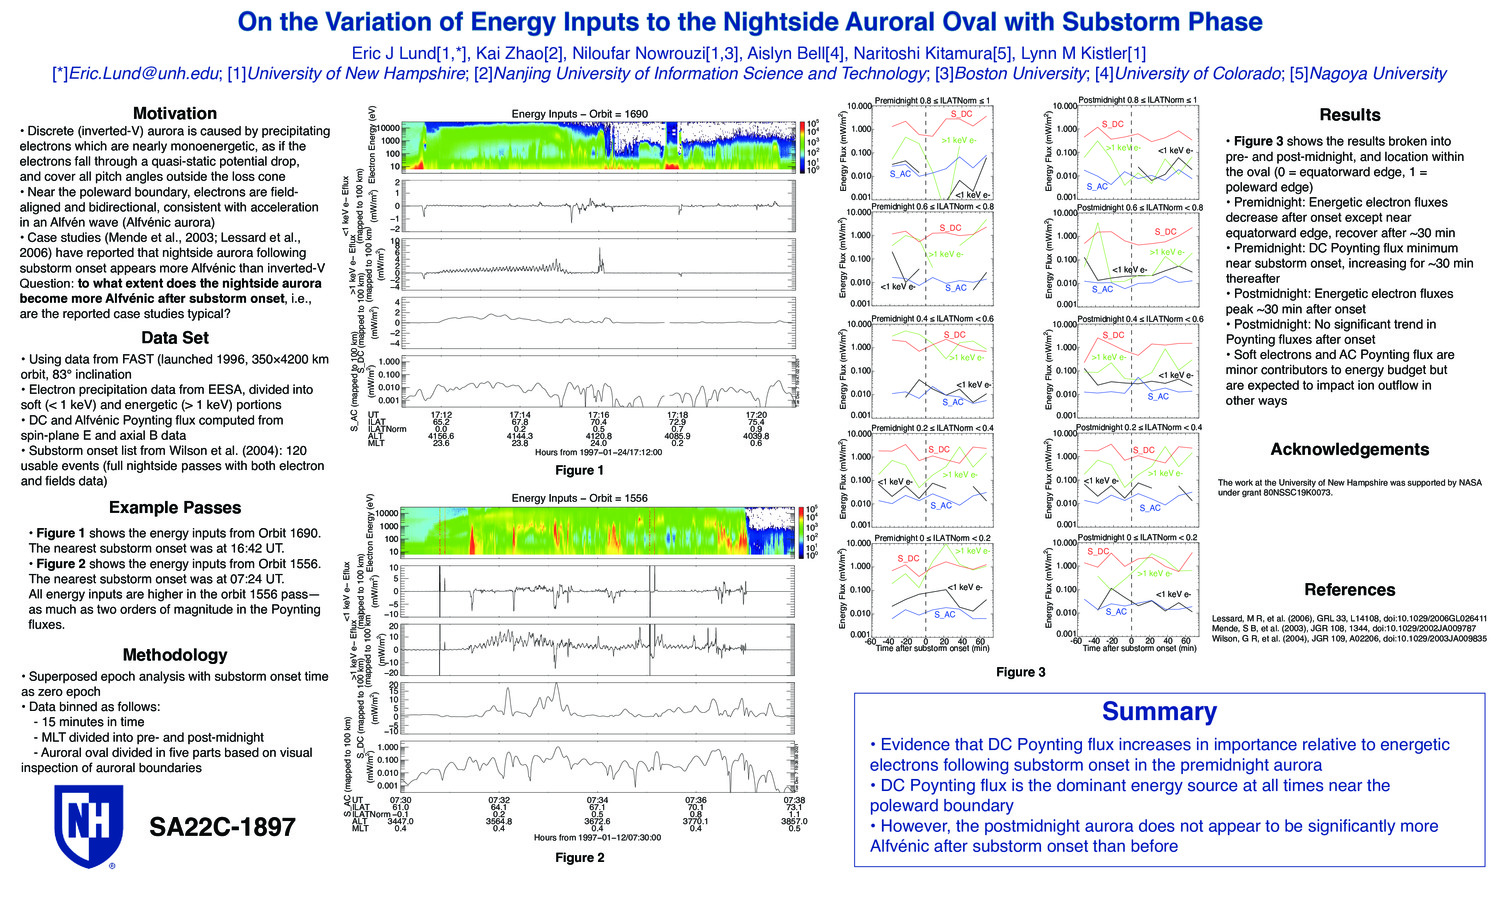 On The Variation Of Energy Inputs To The Nightside Auroral Oval With Substorm Phase by ejlund